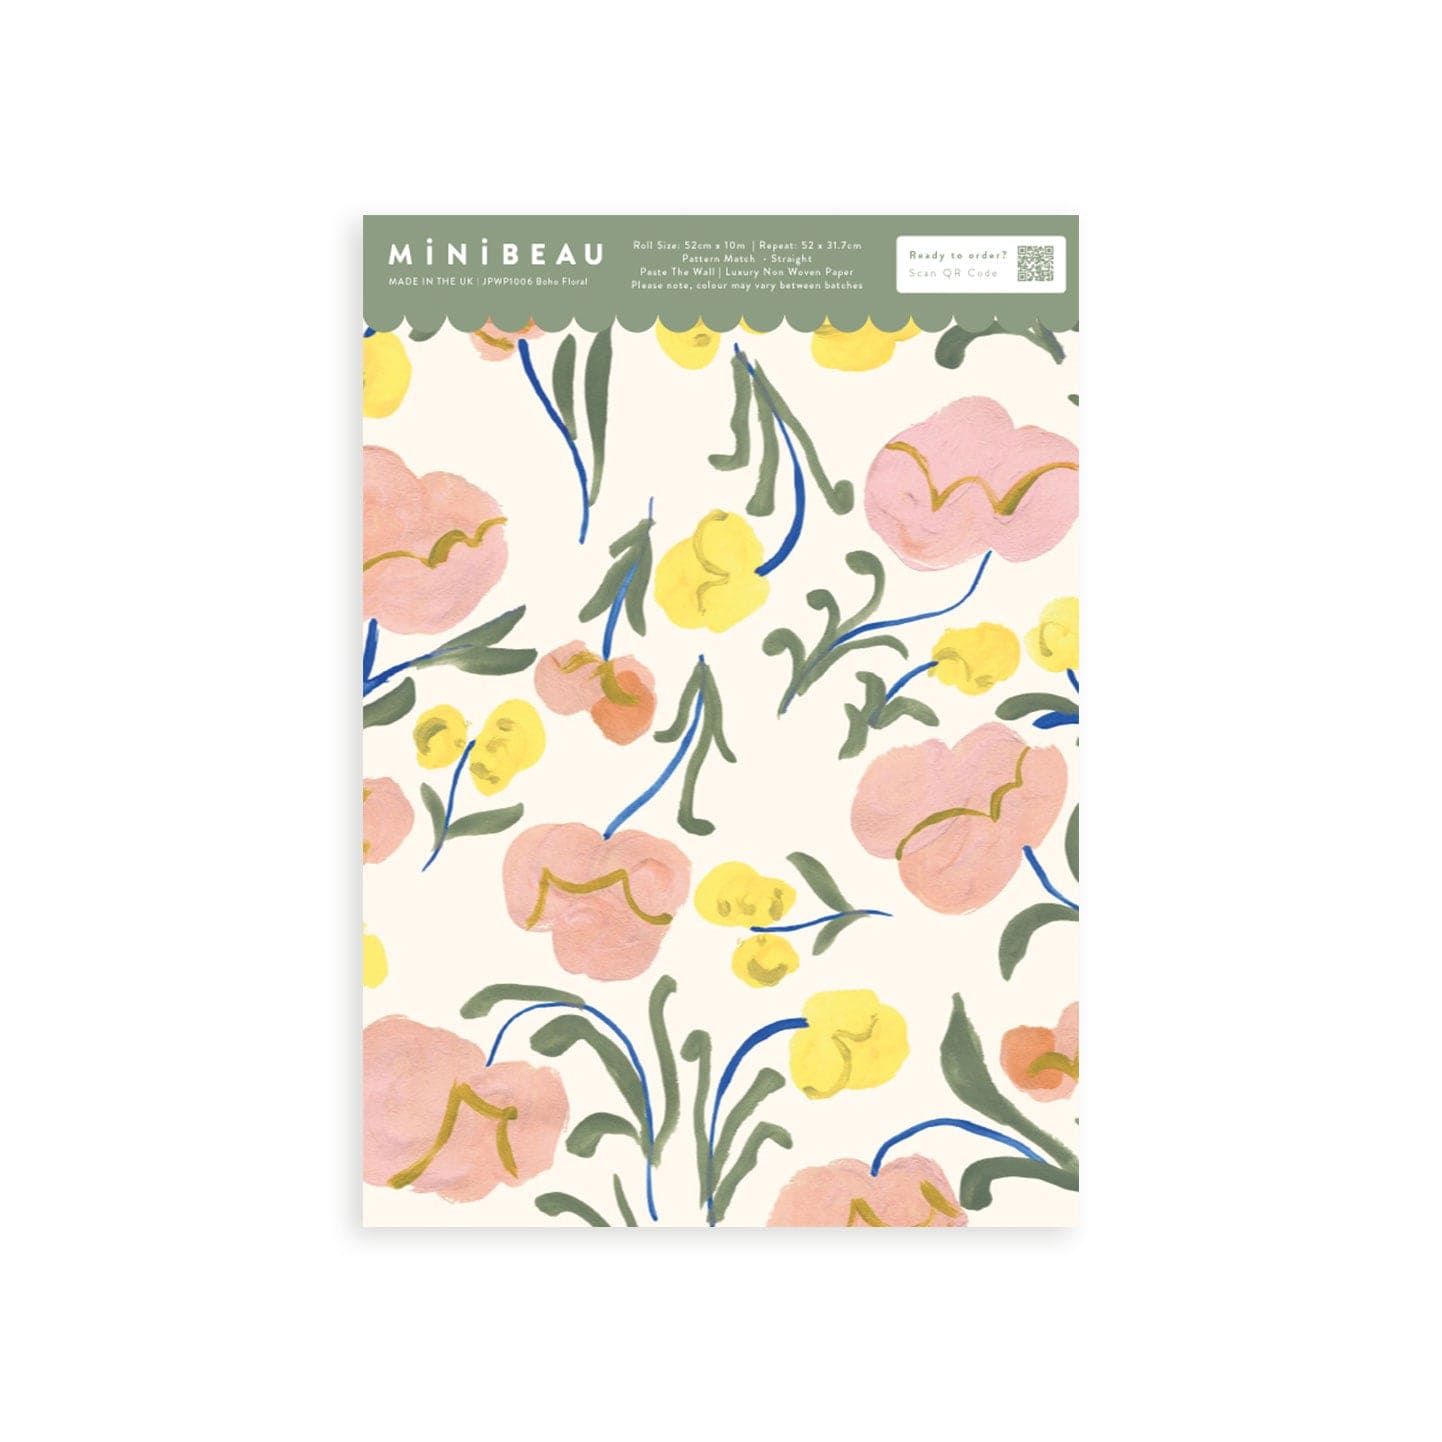 Floral wallpaper with pink and yellow flowers, blue stems and green leaves